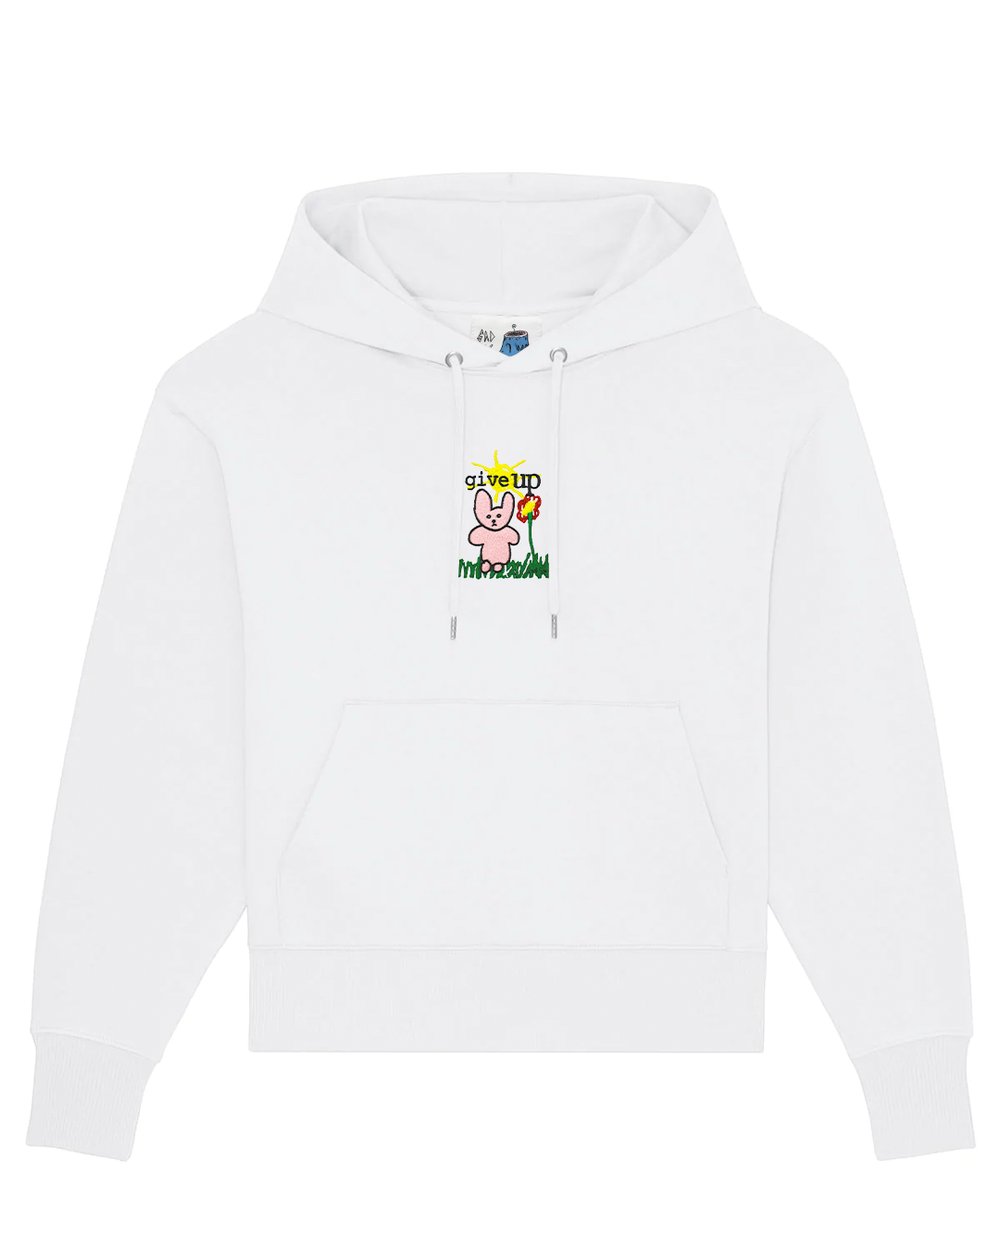 Image of “give up” hoodie (white)